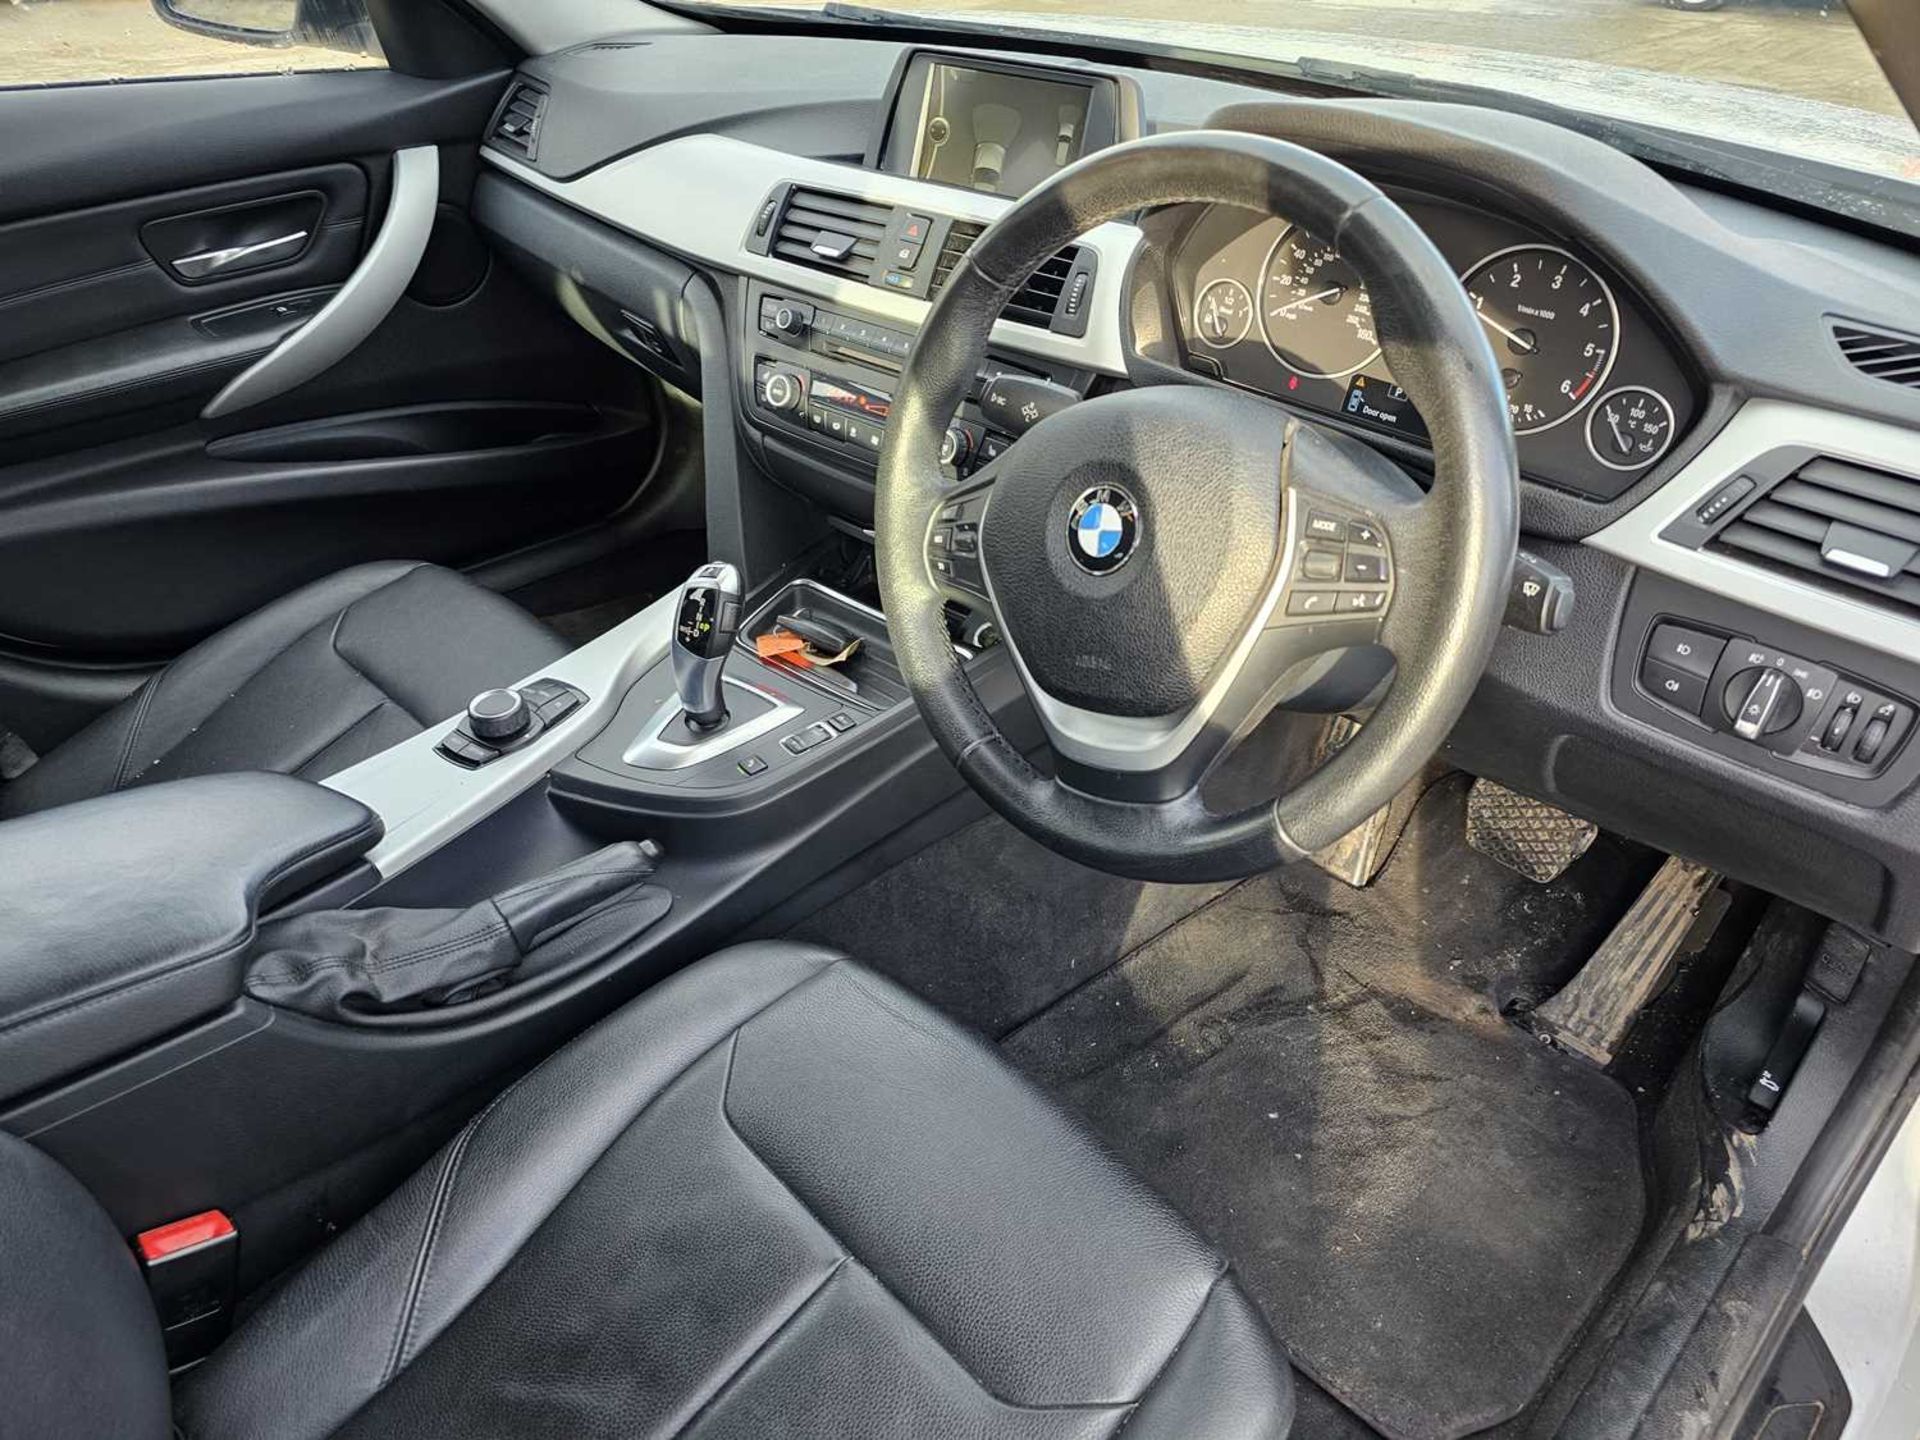 2013 BMW 320D Estate, Auto, Parking Sensors, Full Leather, Heated Seats, Bluetooth, Cruise Control,  - Image 22 of 29